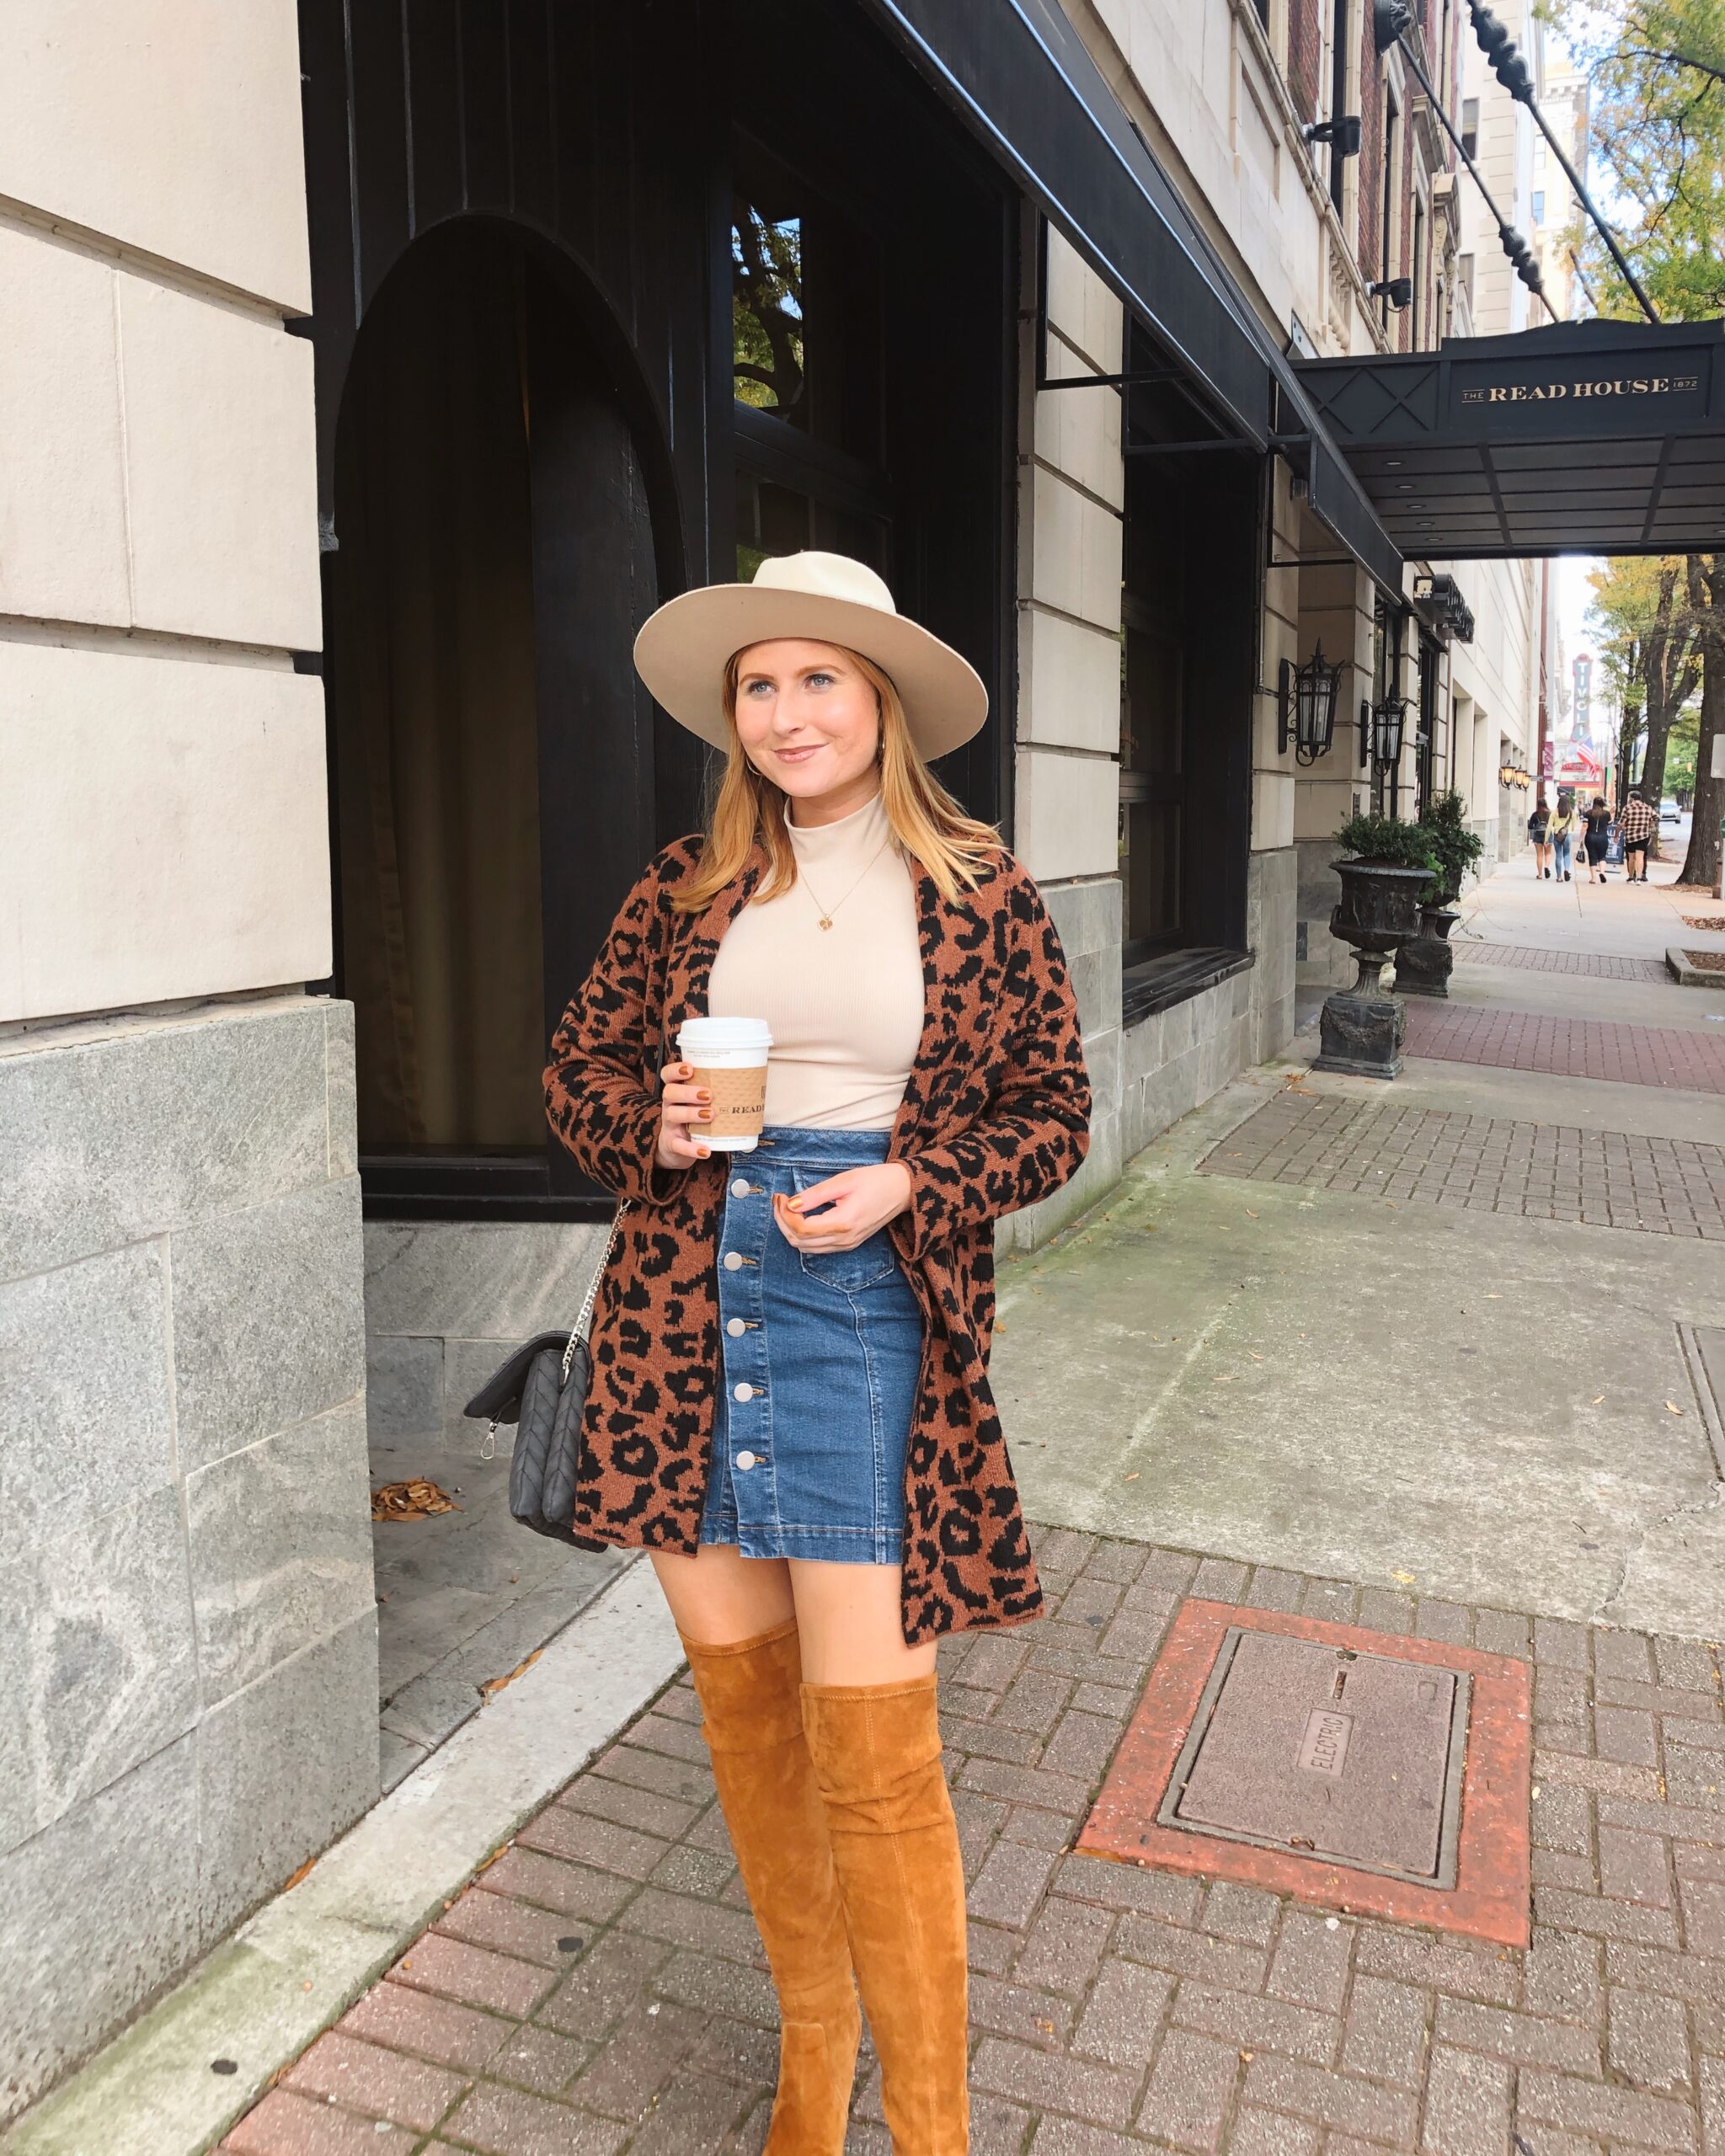 Time and Tru Women's Shawl Collar Cardigan Sweater - Walmart Fashion Finds. Affordable by Amanda wears denim mini skirt, brown suede boots, leopard cardigan and a tan hat at the Read House Hotel in Chattanooga, TN.